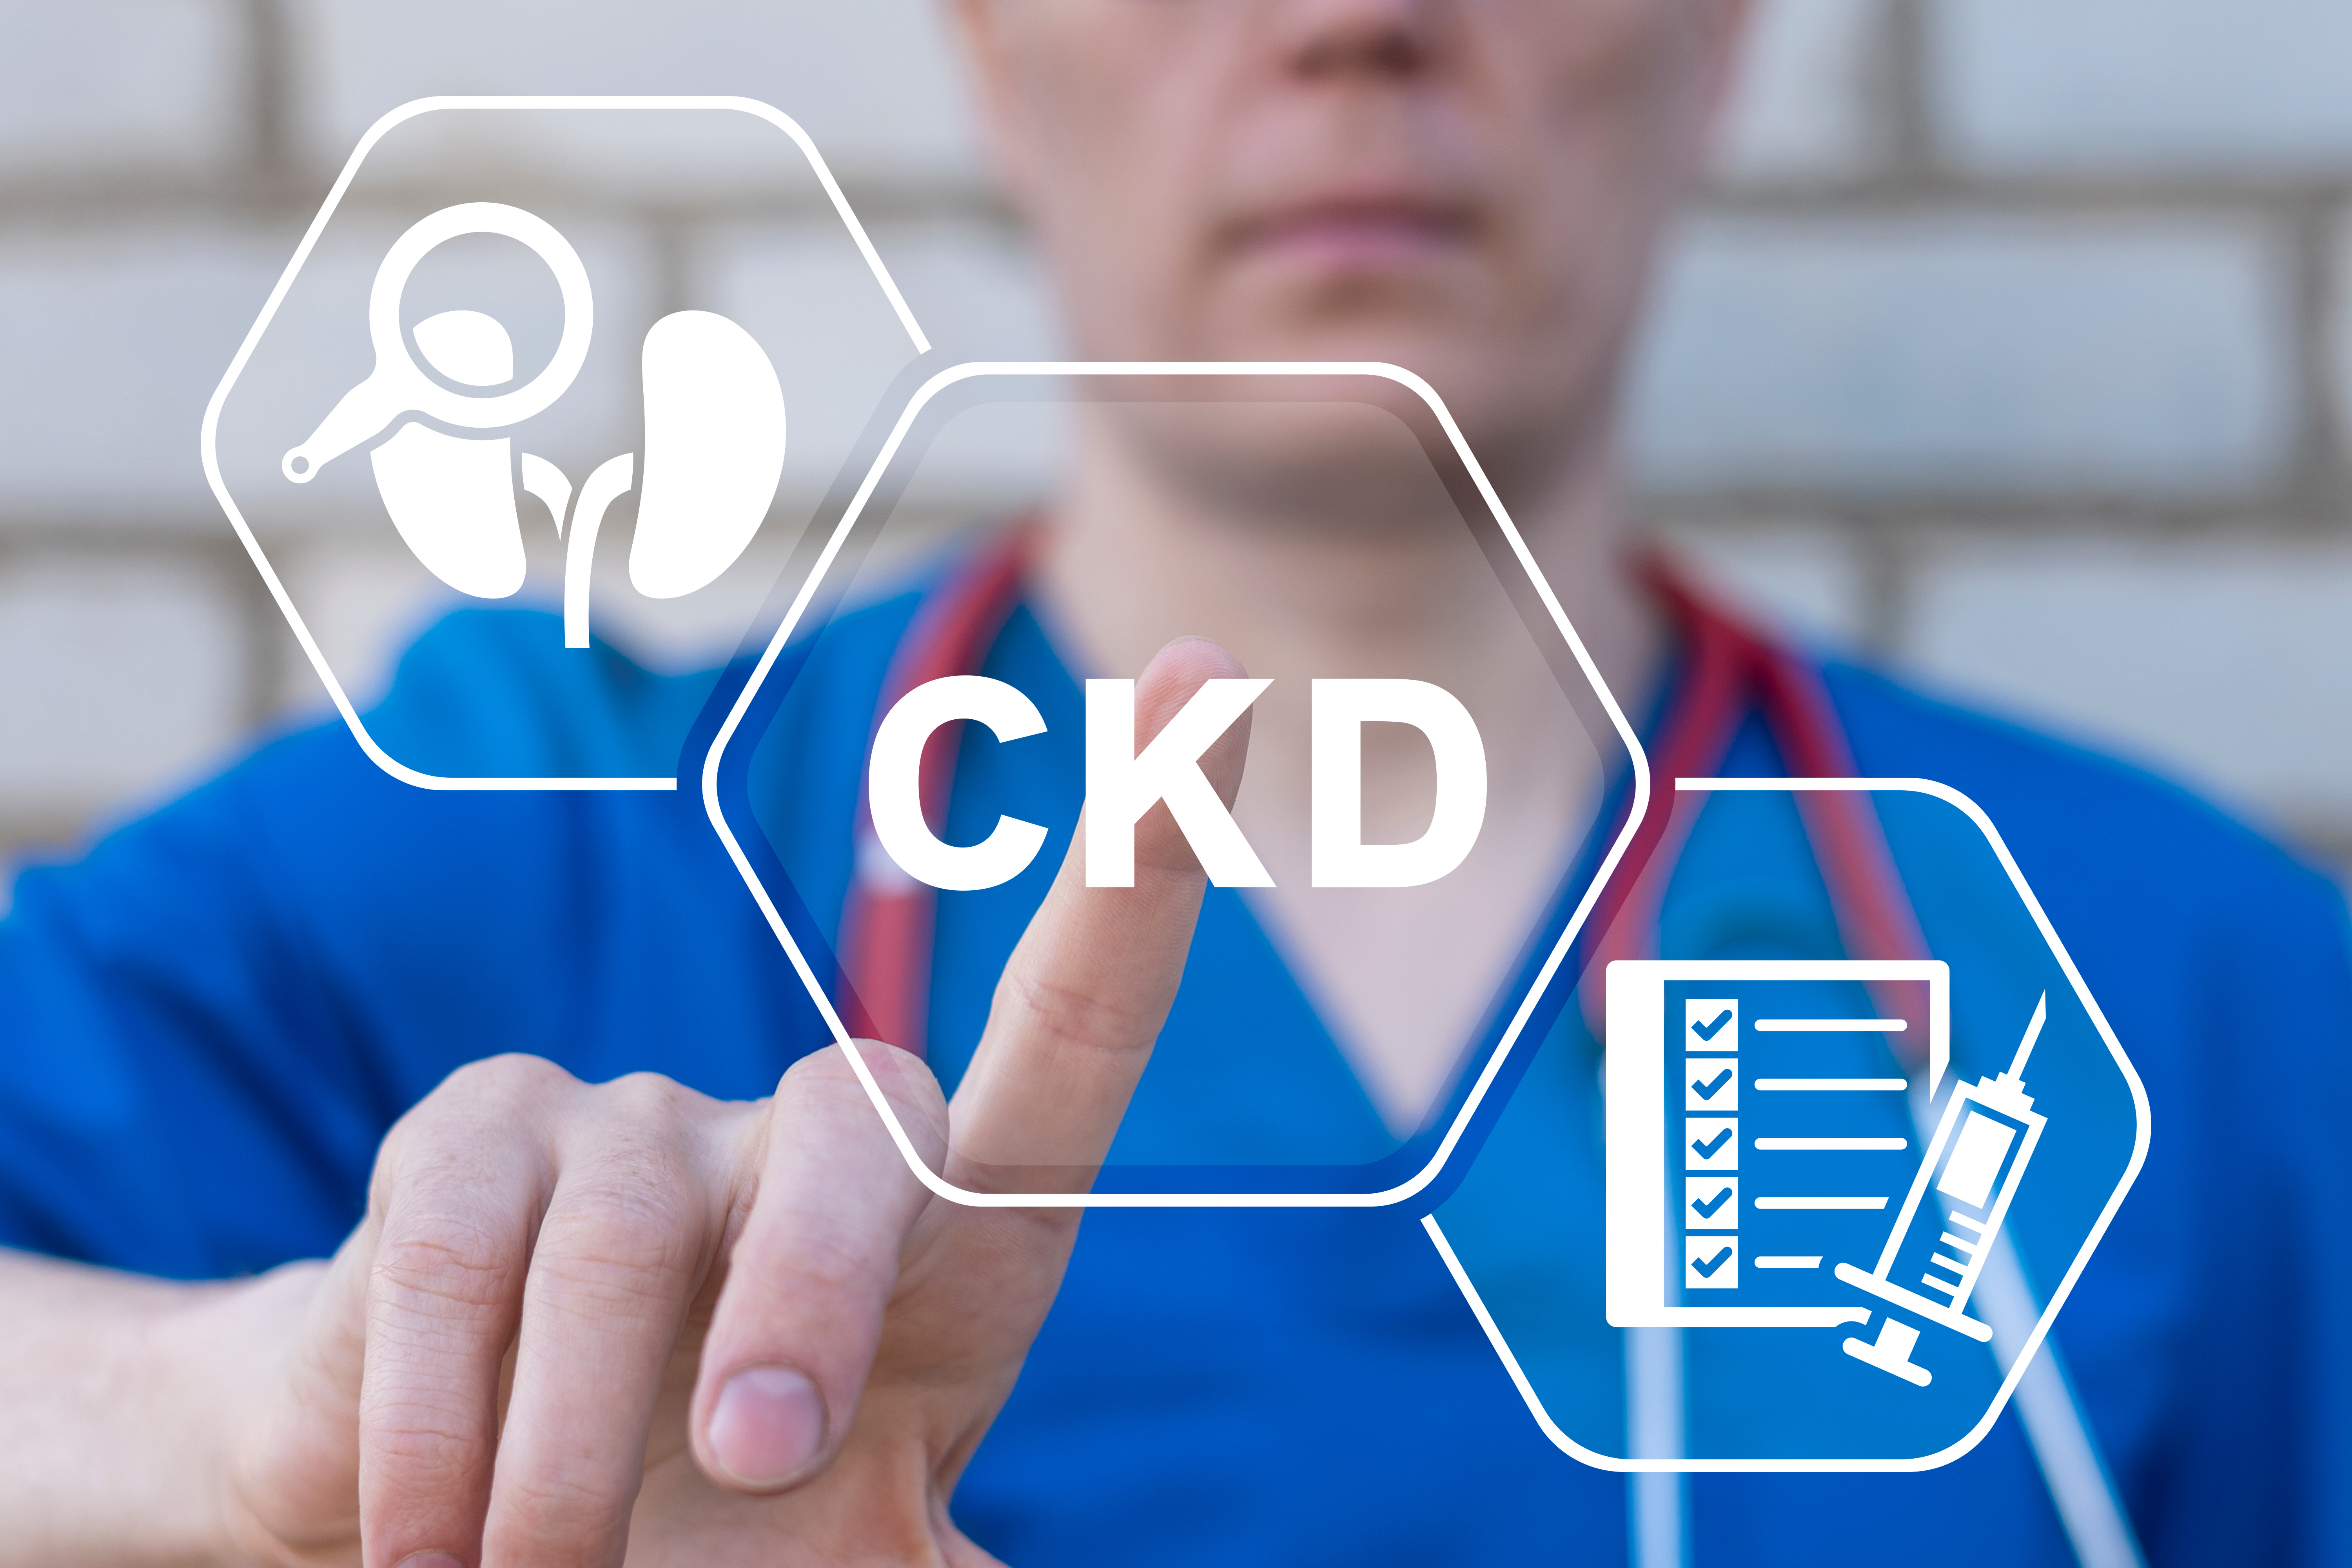 Doctor using virtual touchscreen presses abbreviation: CKD. Medical concept of CKD Chronic Kidney Disease.